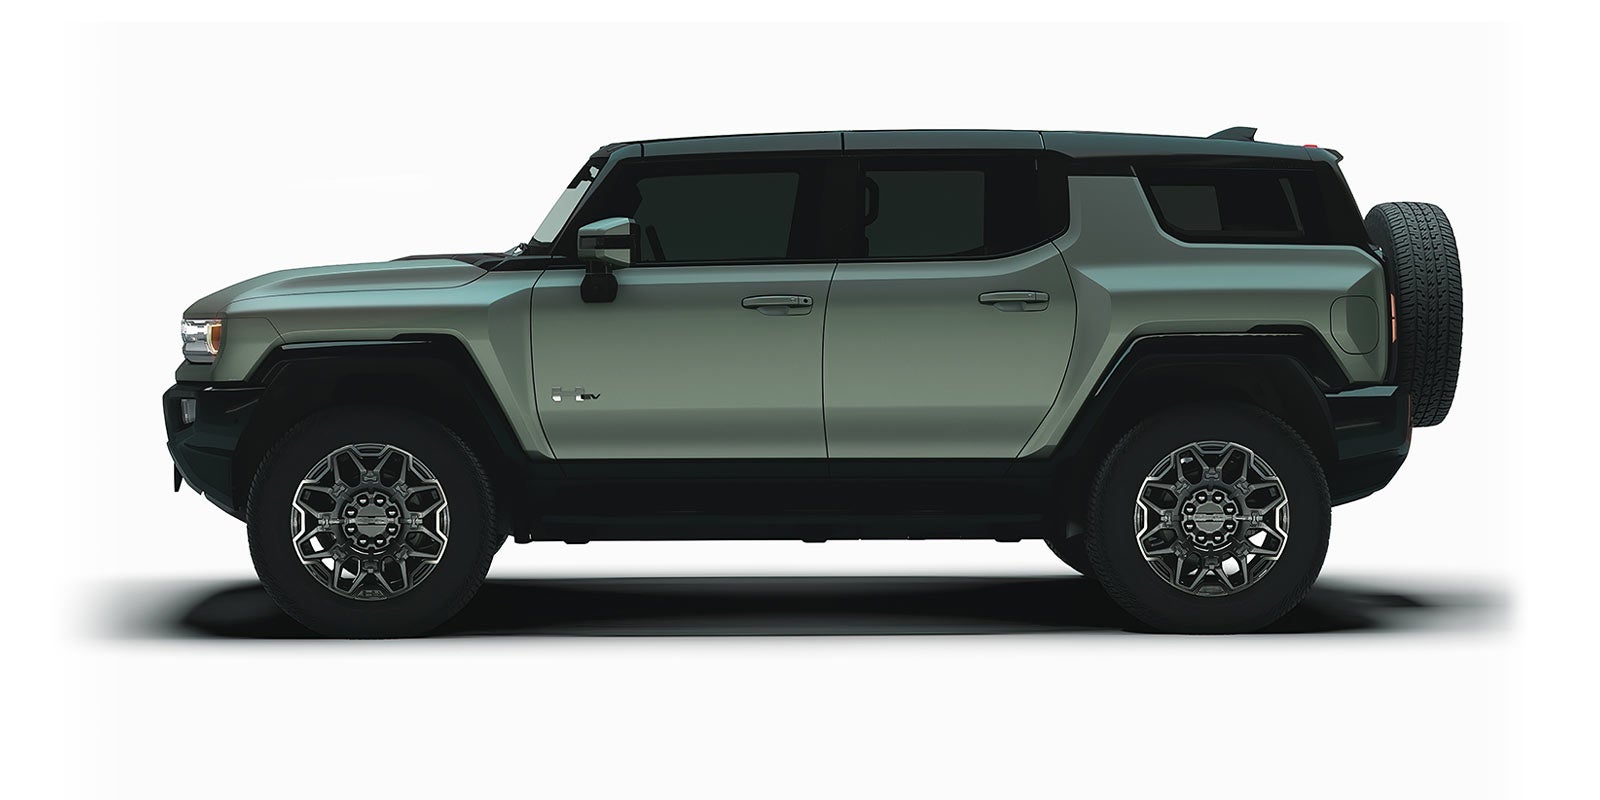 hummer ev pickup and hummer ev | Freedom Buick GMC Greenville by Ed Morse in GREENVILLE TX